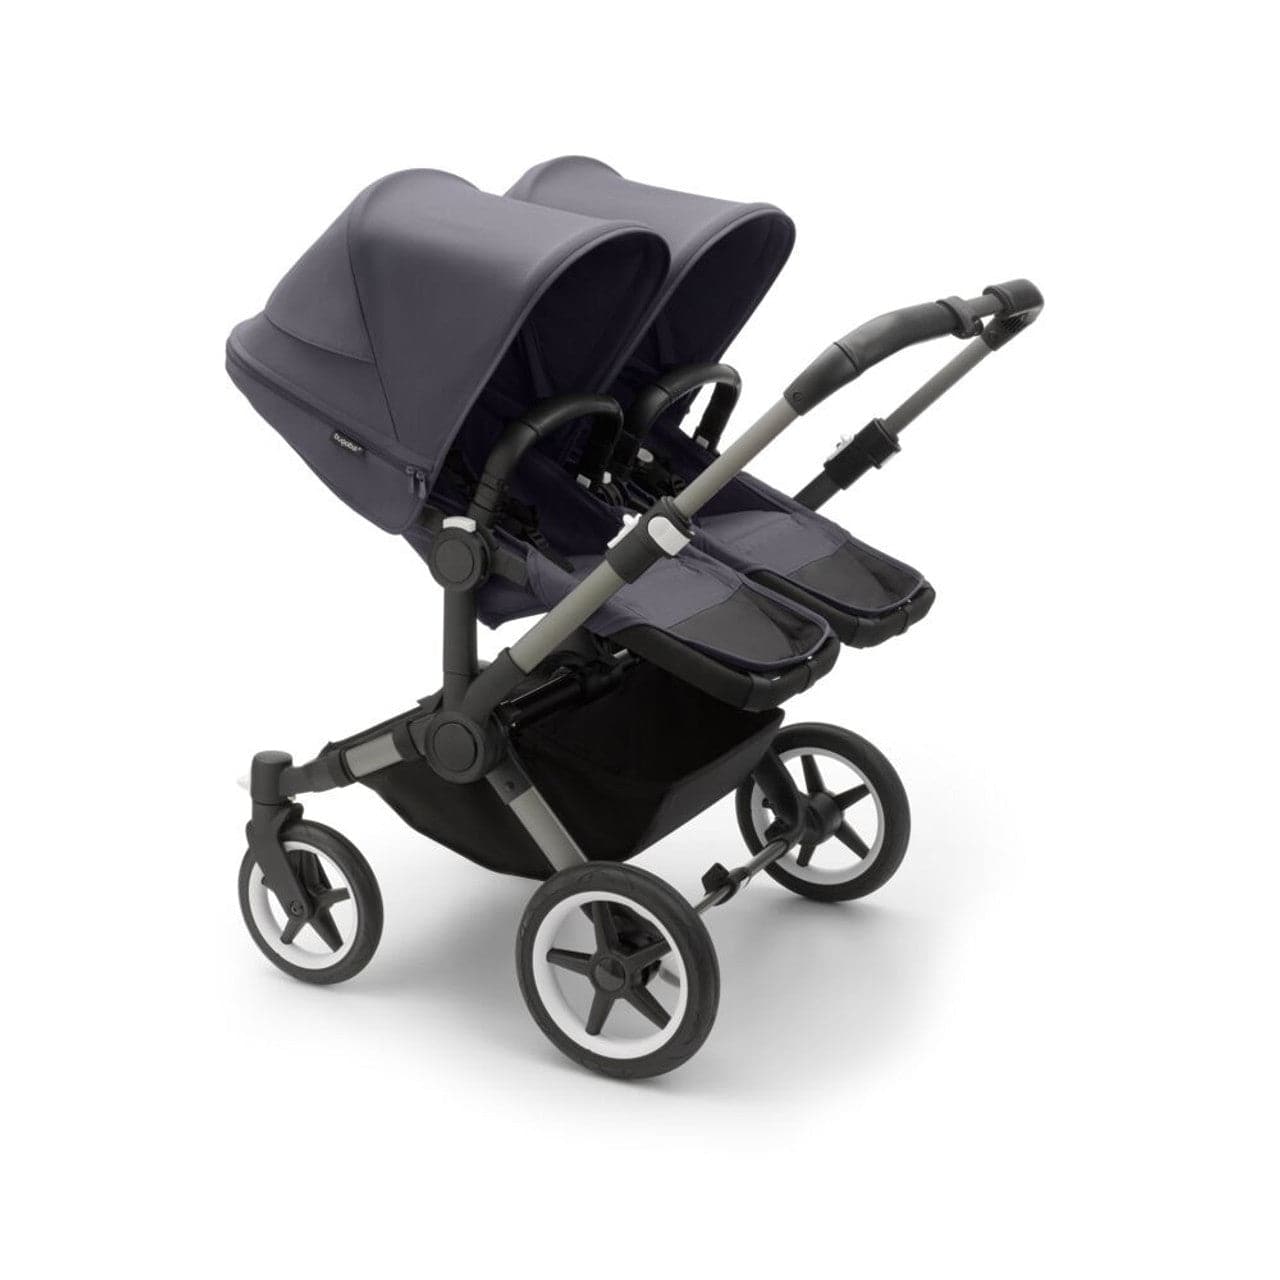 Bugaboo Donkey 5 Twin Complete Travel System + Turtle Air - Graphite/Stormy Blue - For Your Little One